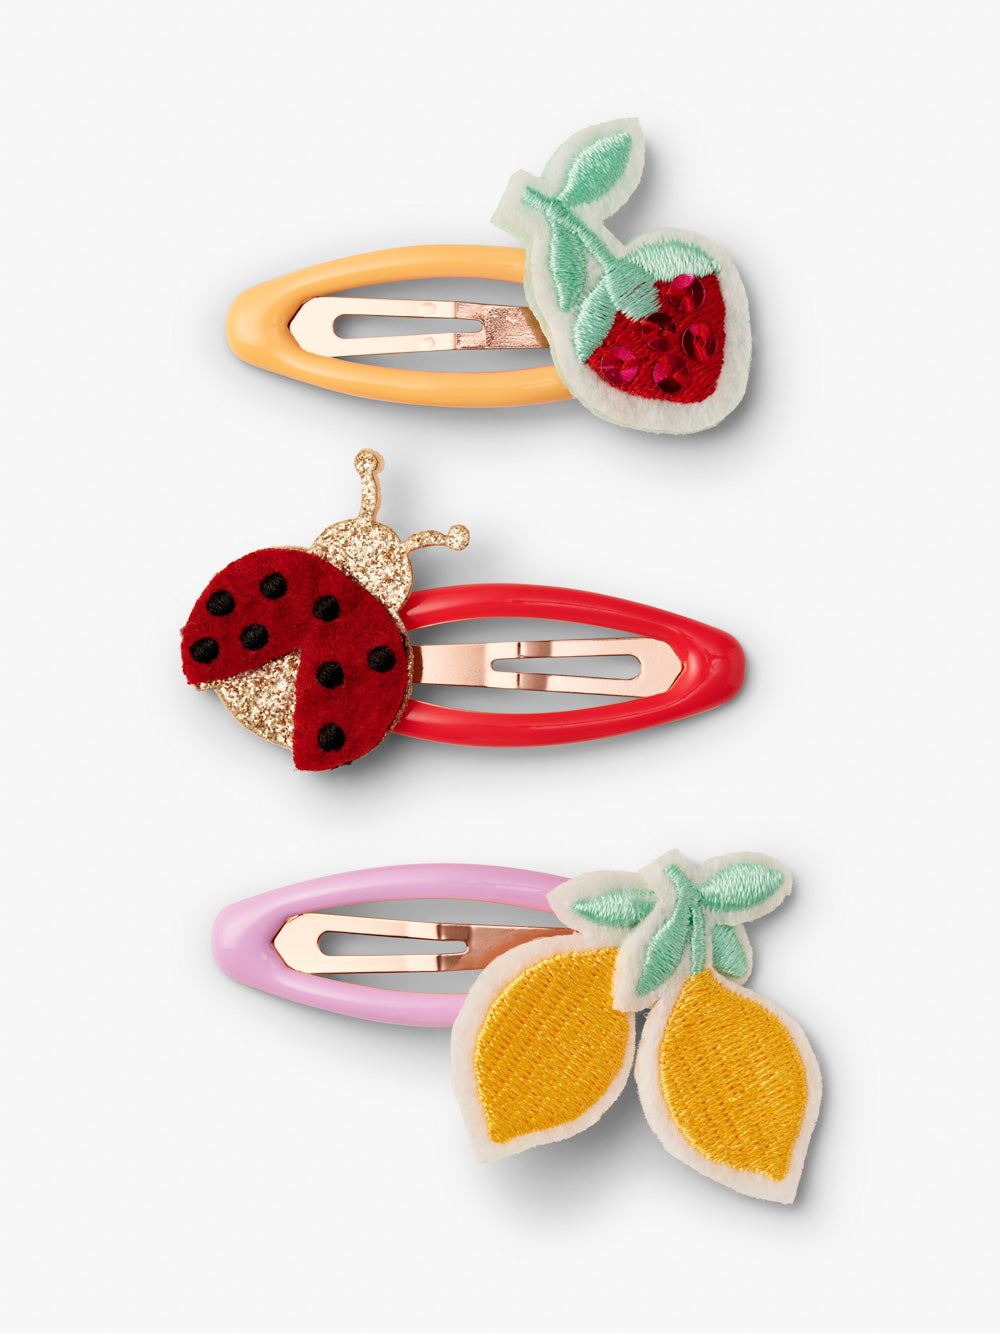 Stych Girls' - Embroidered strawberry, ladybug and lemon patch clips on bright enamel colours. Yellow, red and pink. 